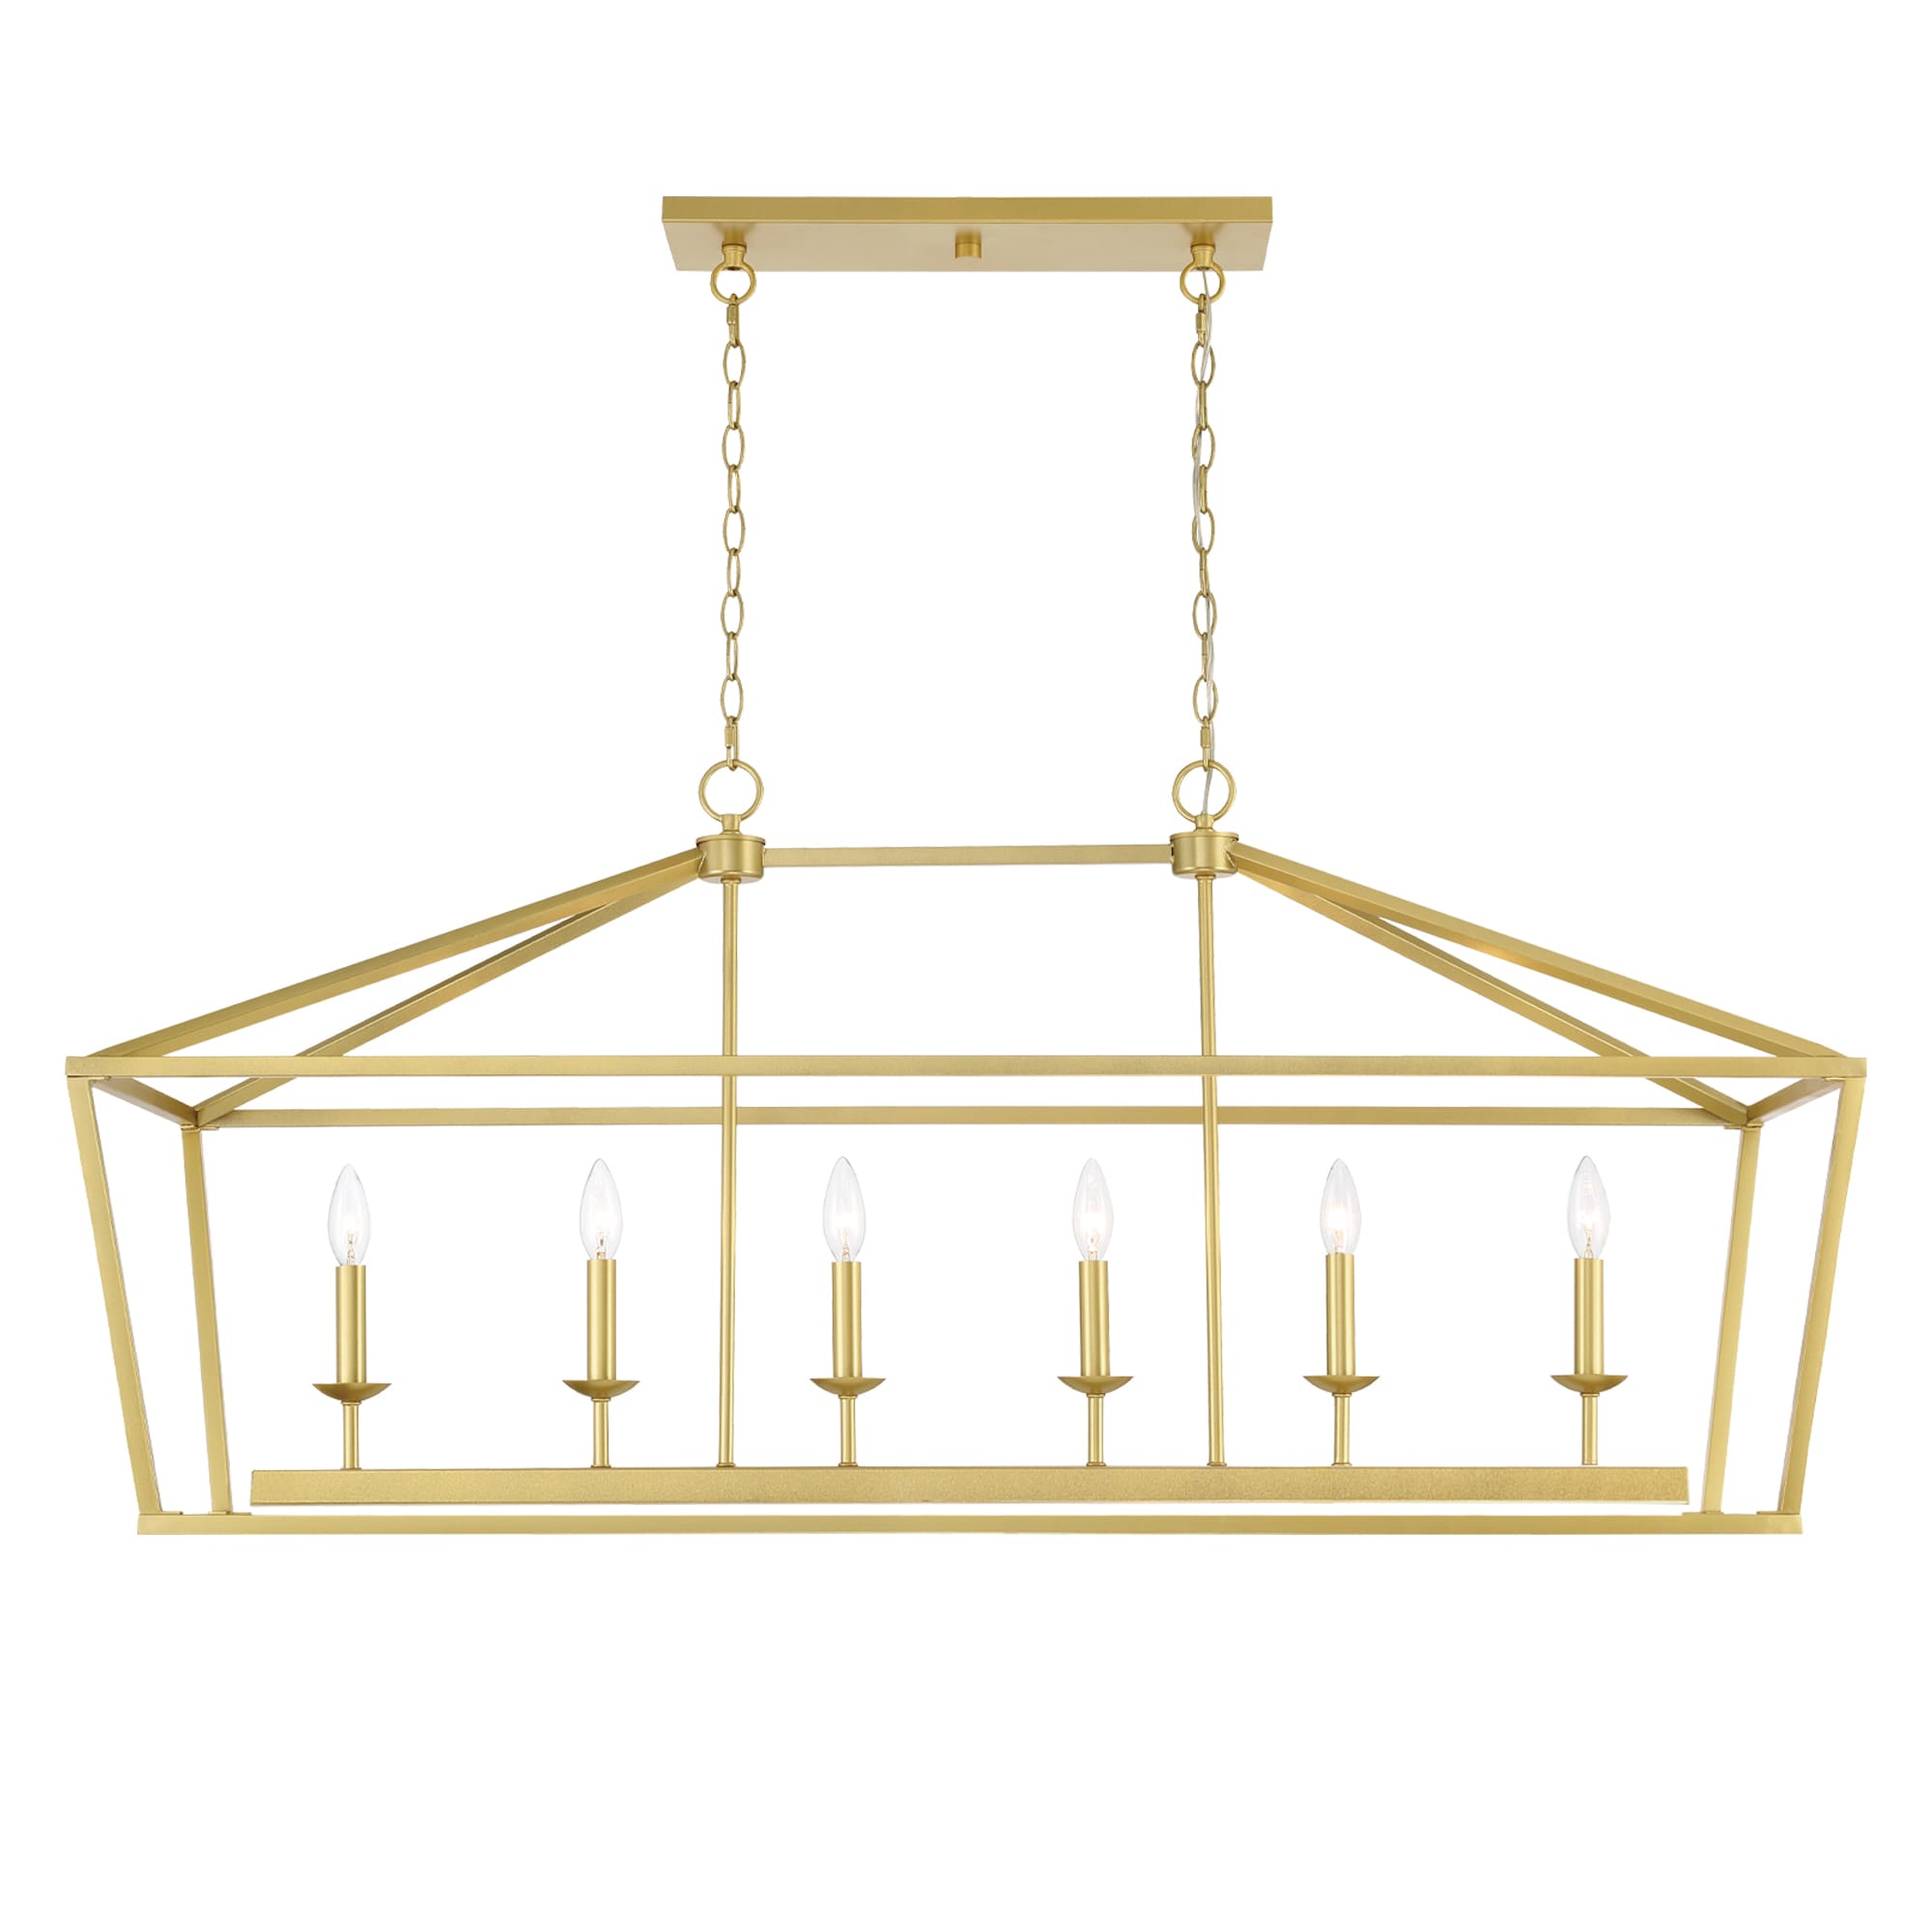 ACROMA Colmar 6-Light Satinbrass Modern/Contemporary LED Dry rated ...